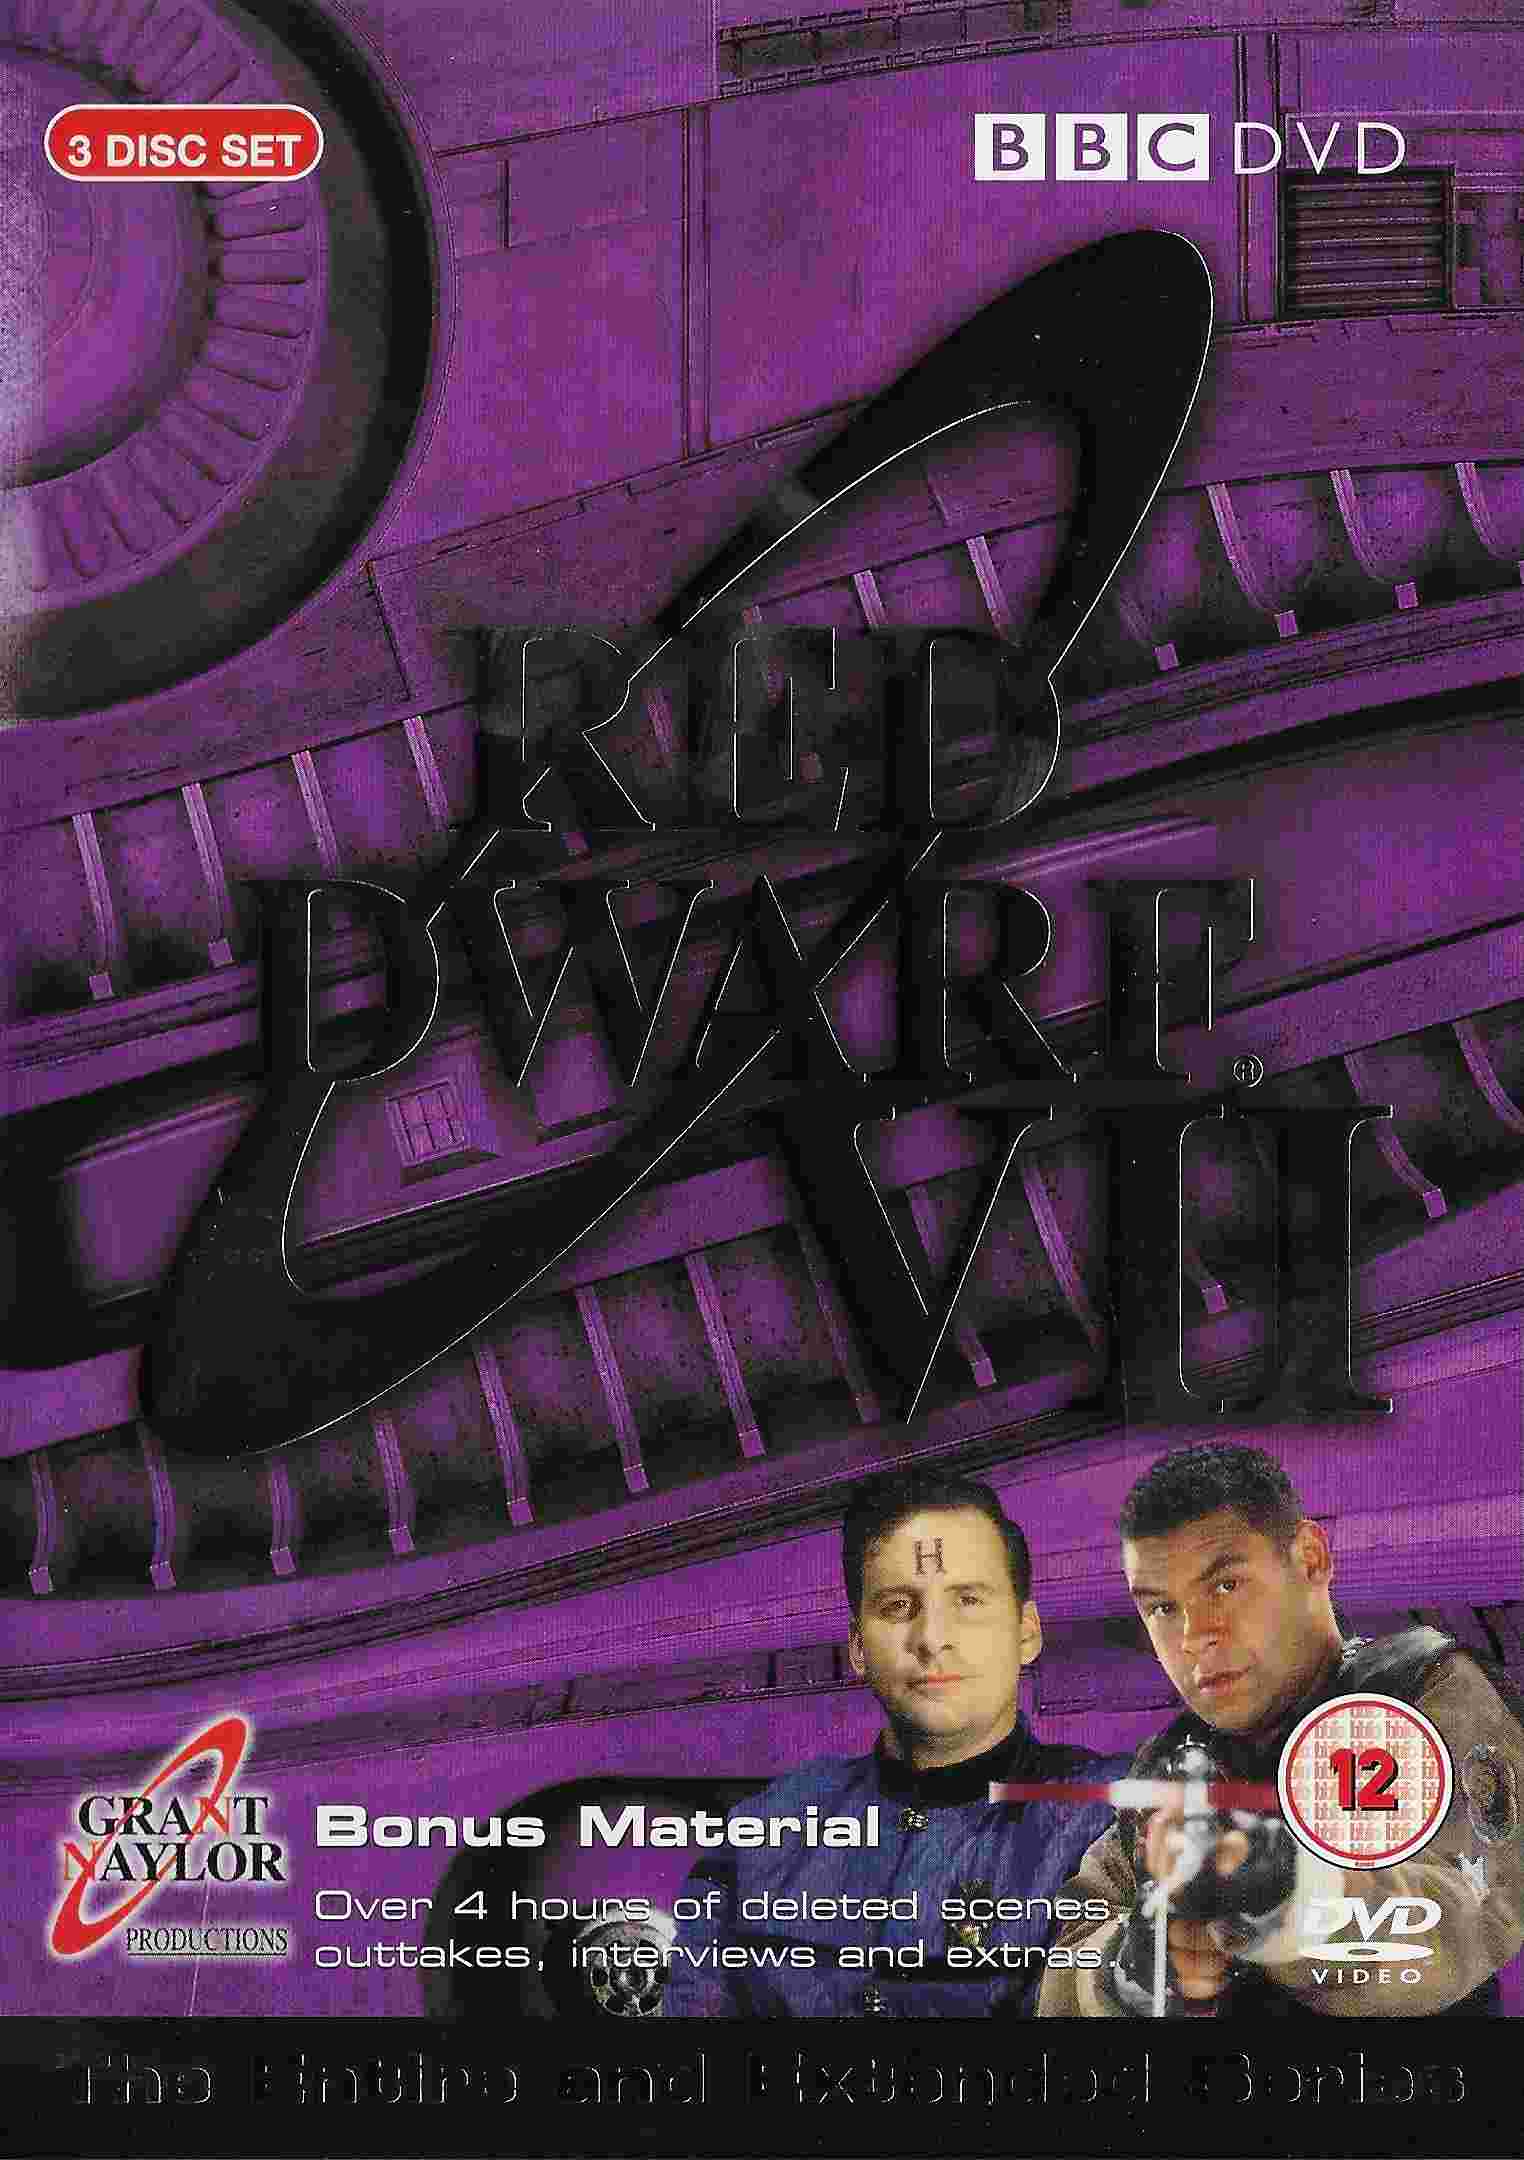 Picture of BBCDVD 1692 Red dwarf - Series VII by artist Rob Grant / Doug Naylor from the BBC dvds - Records and Tapes library